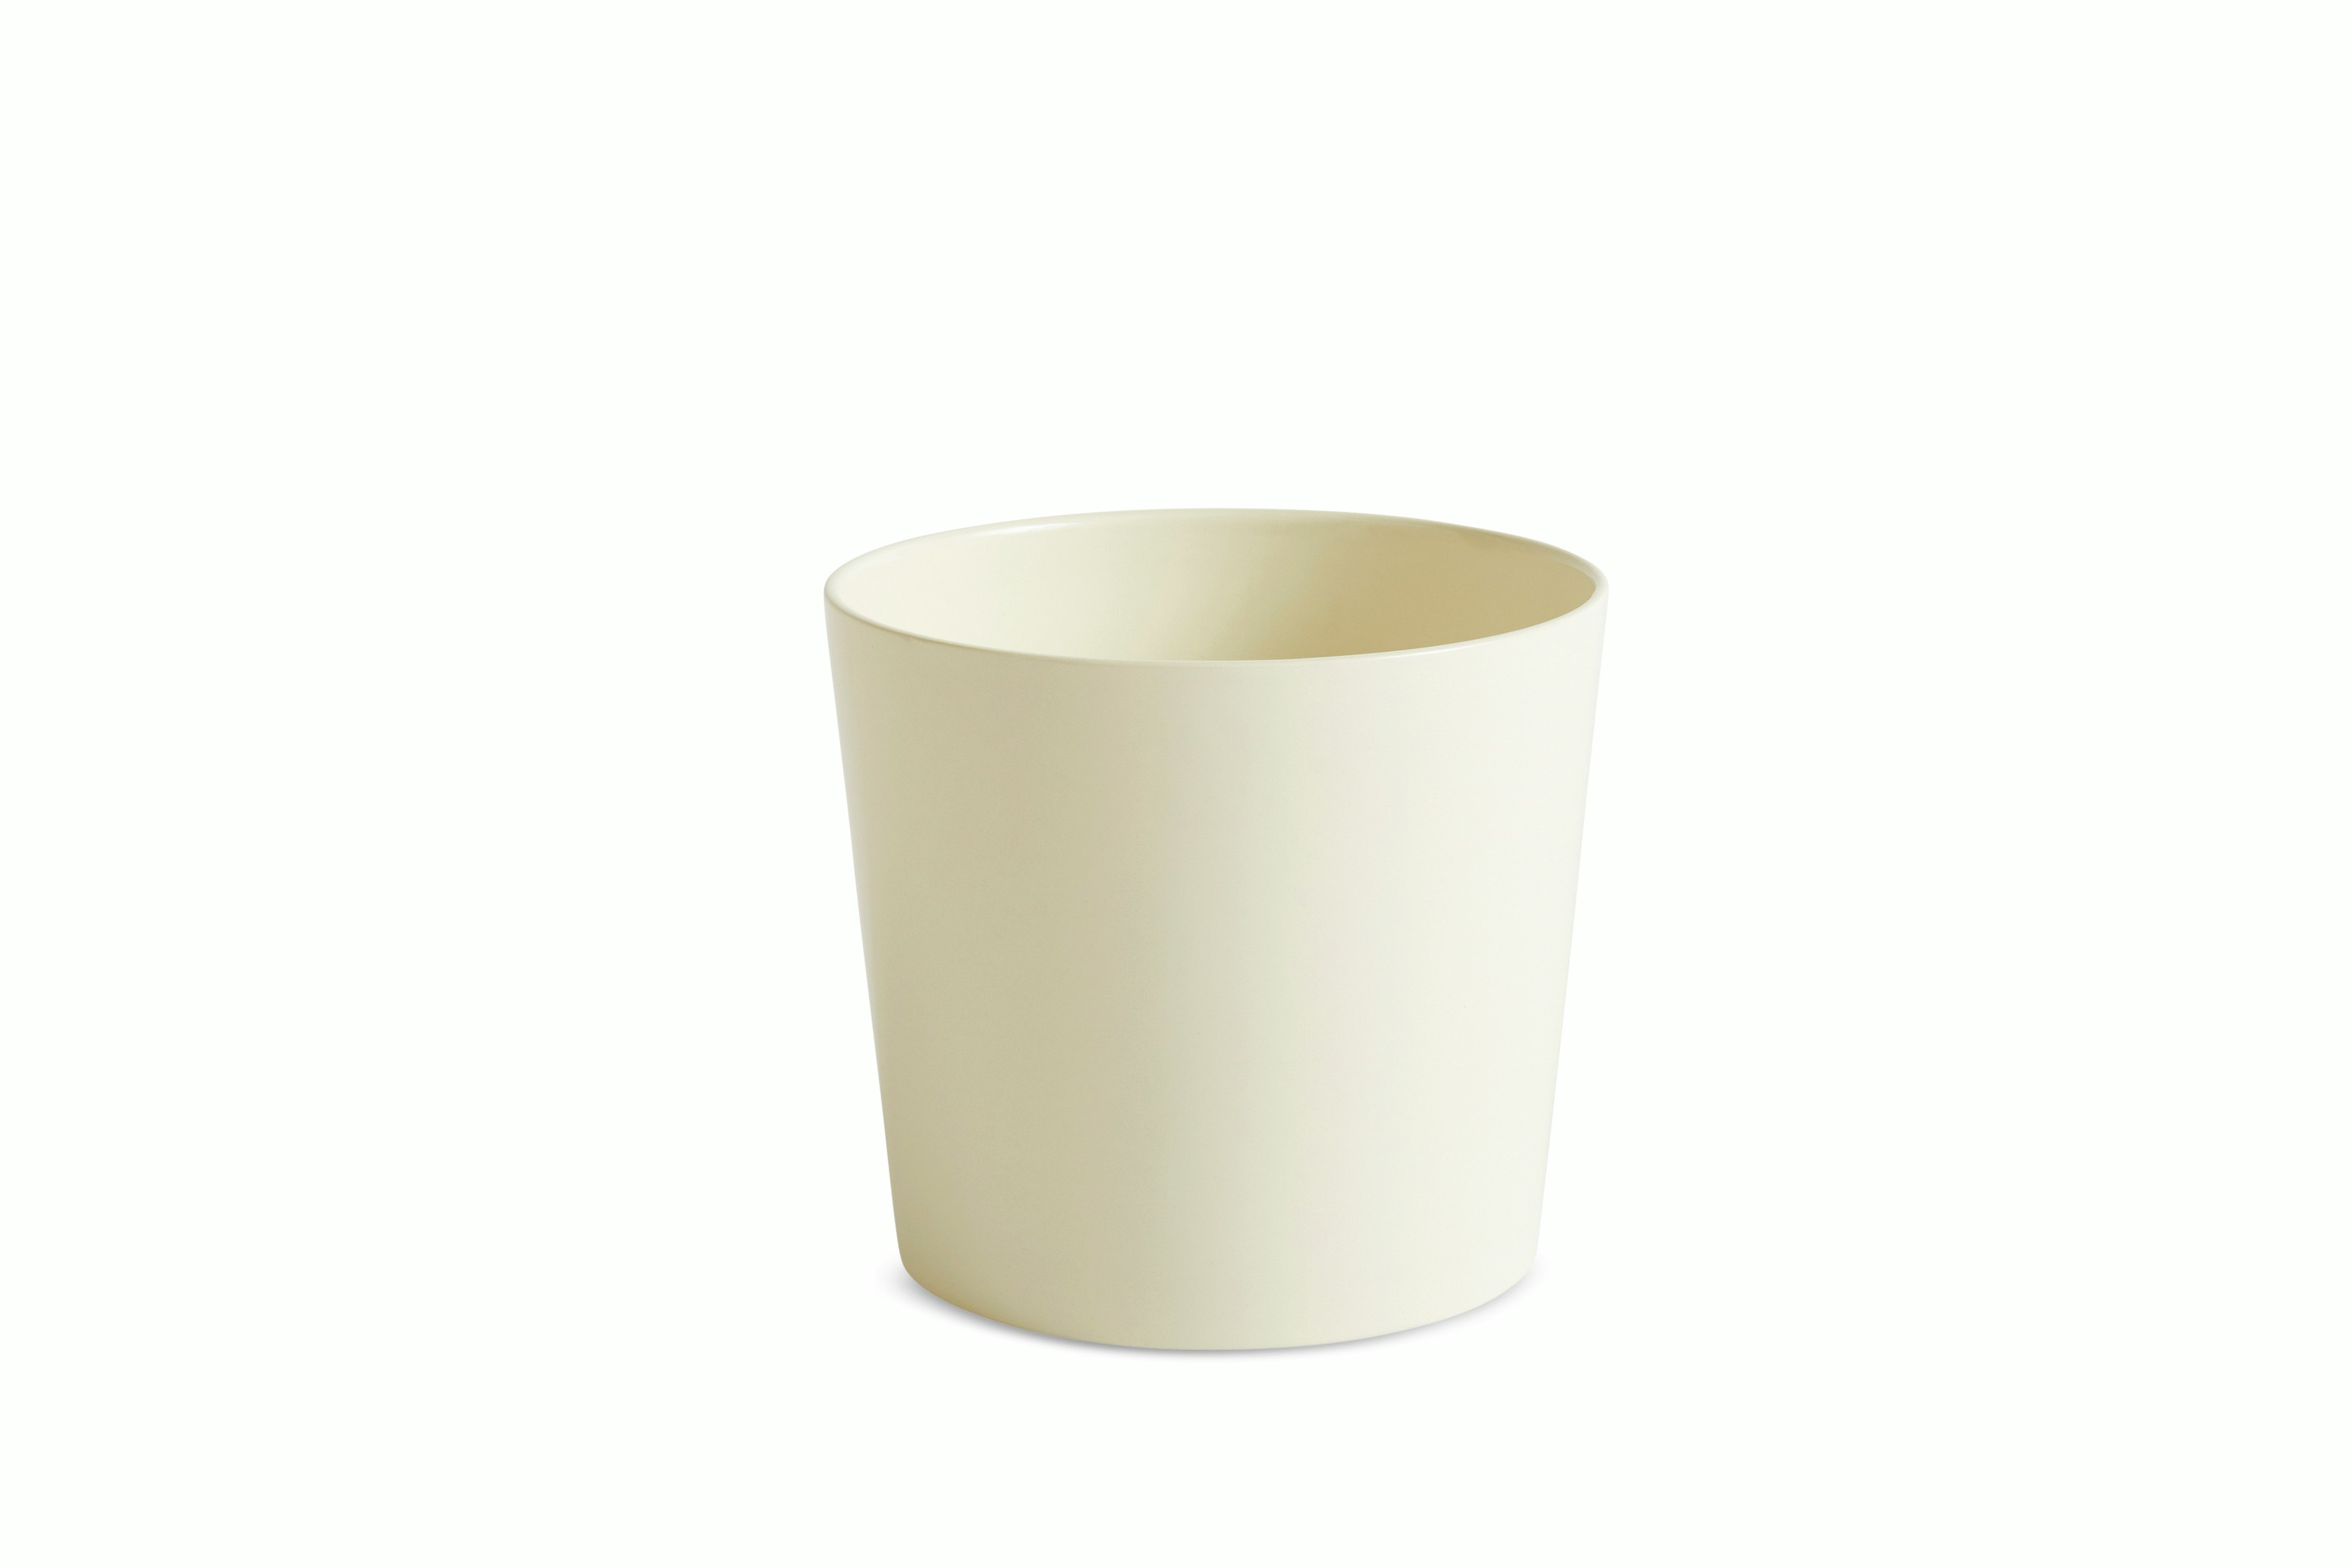 Authentic HAY Enamel CupDesign Within Reach 